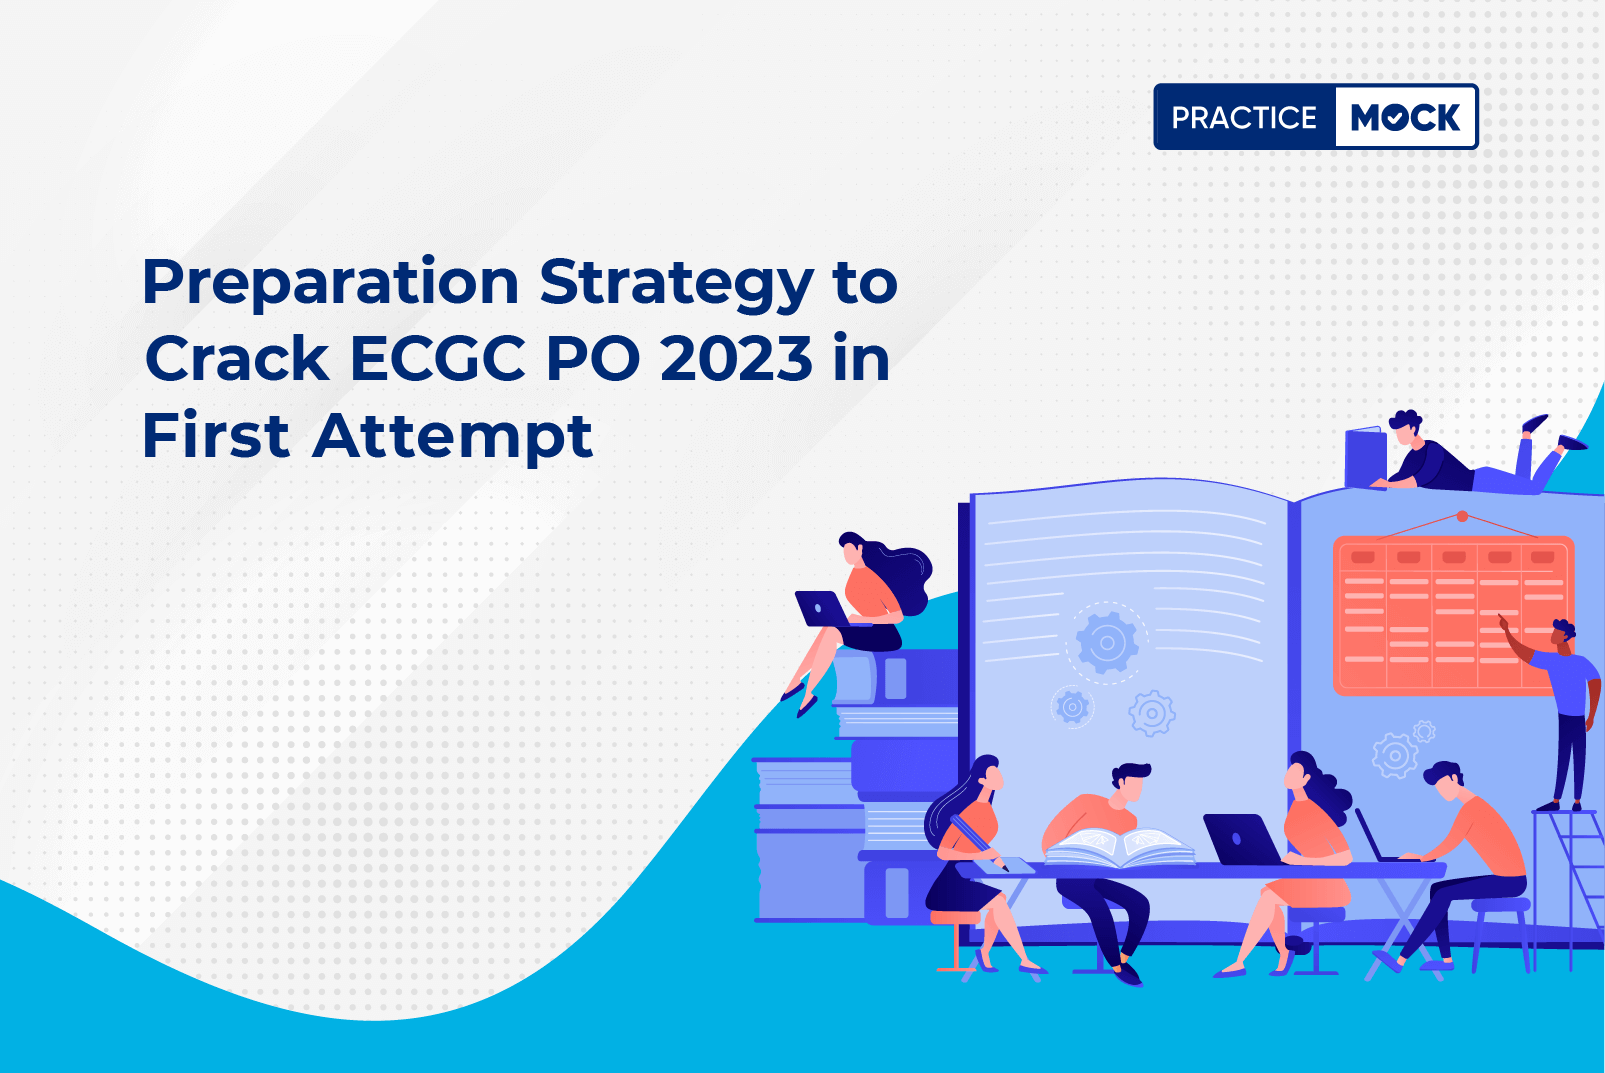 Preparation Strategy to Crack ECGC PO 2023 in first attempt